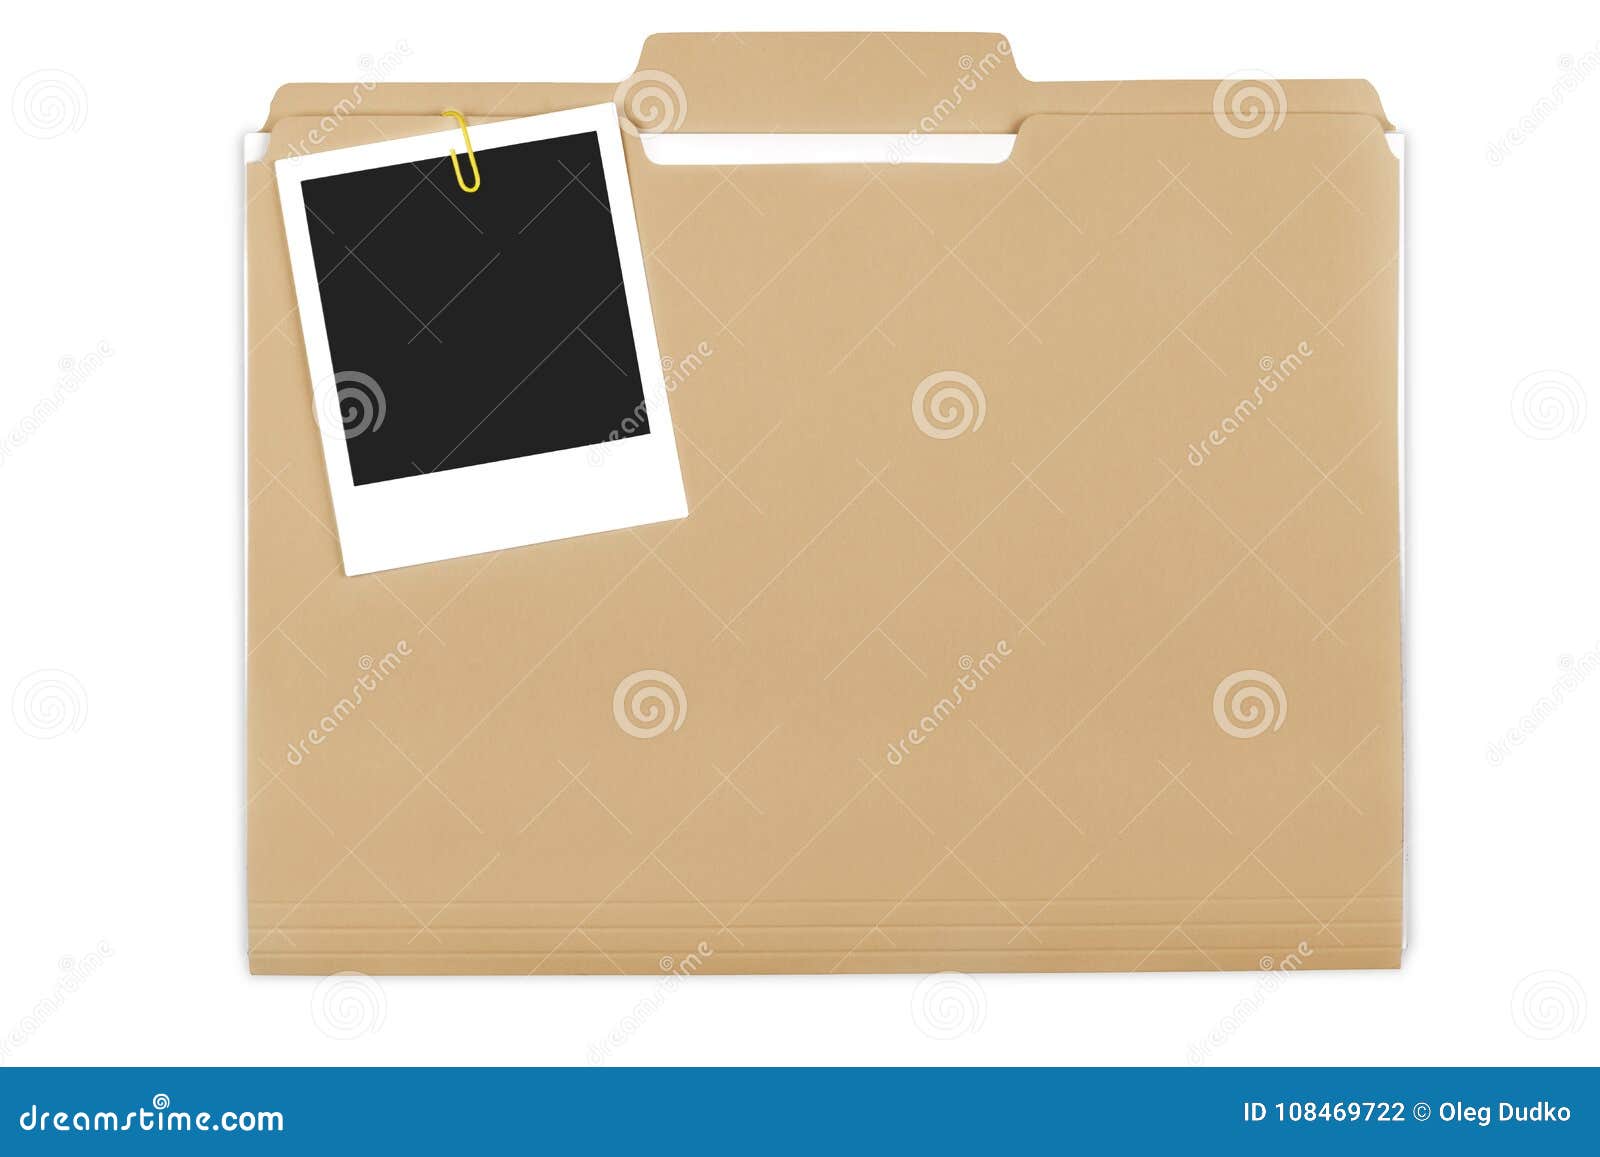 file folder with documents and blank polaroid